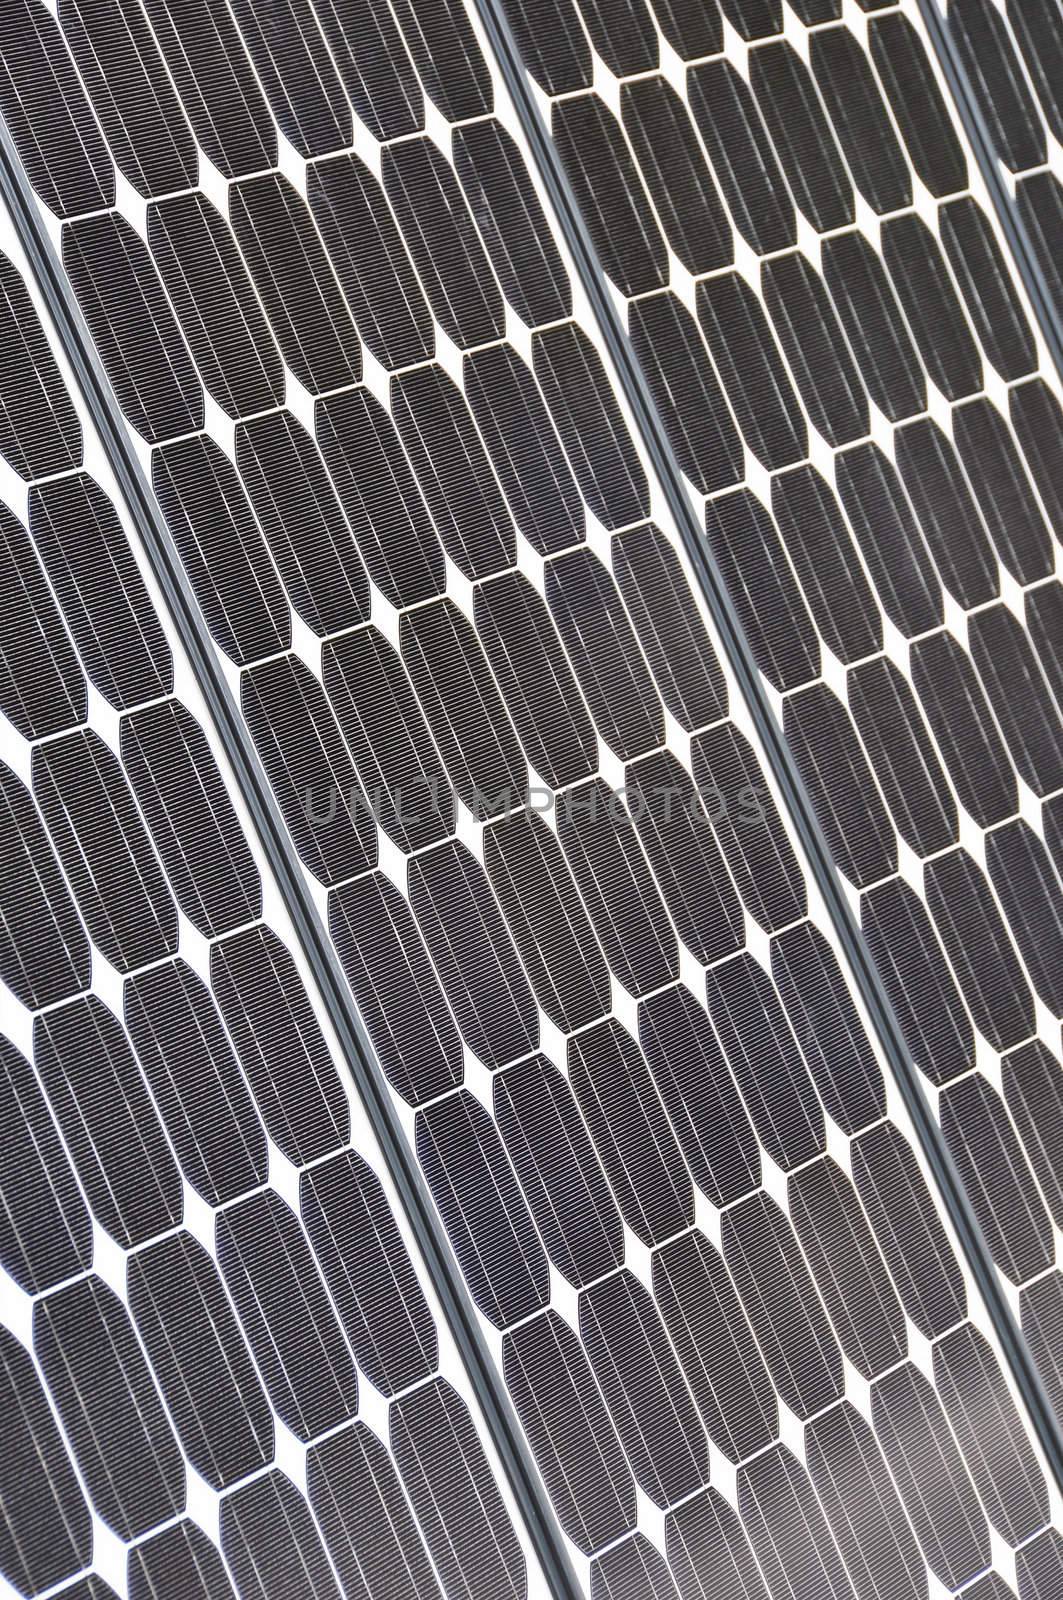 Detail of a solar panel